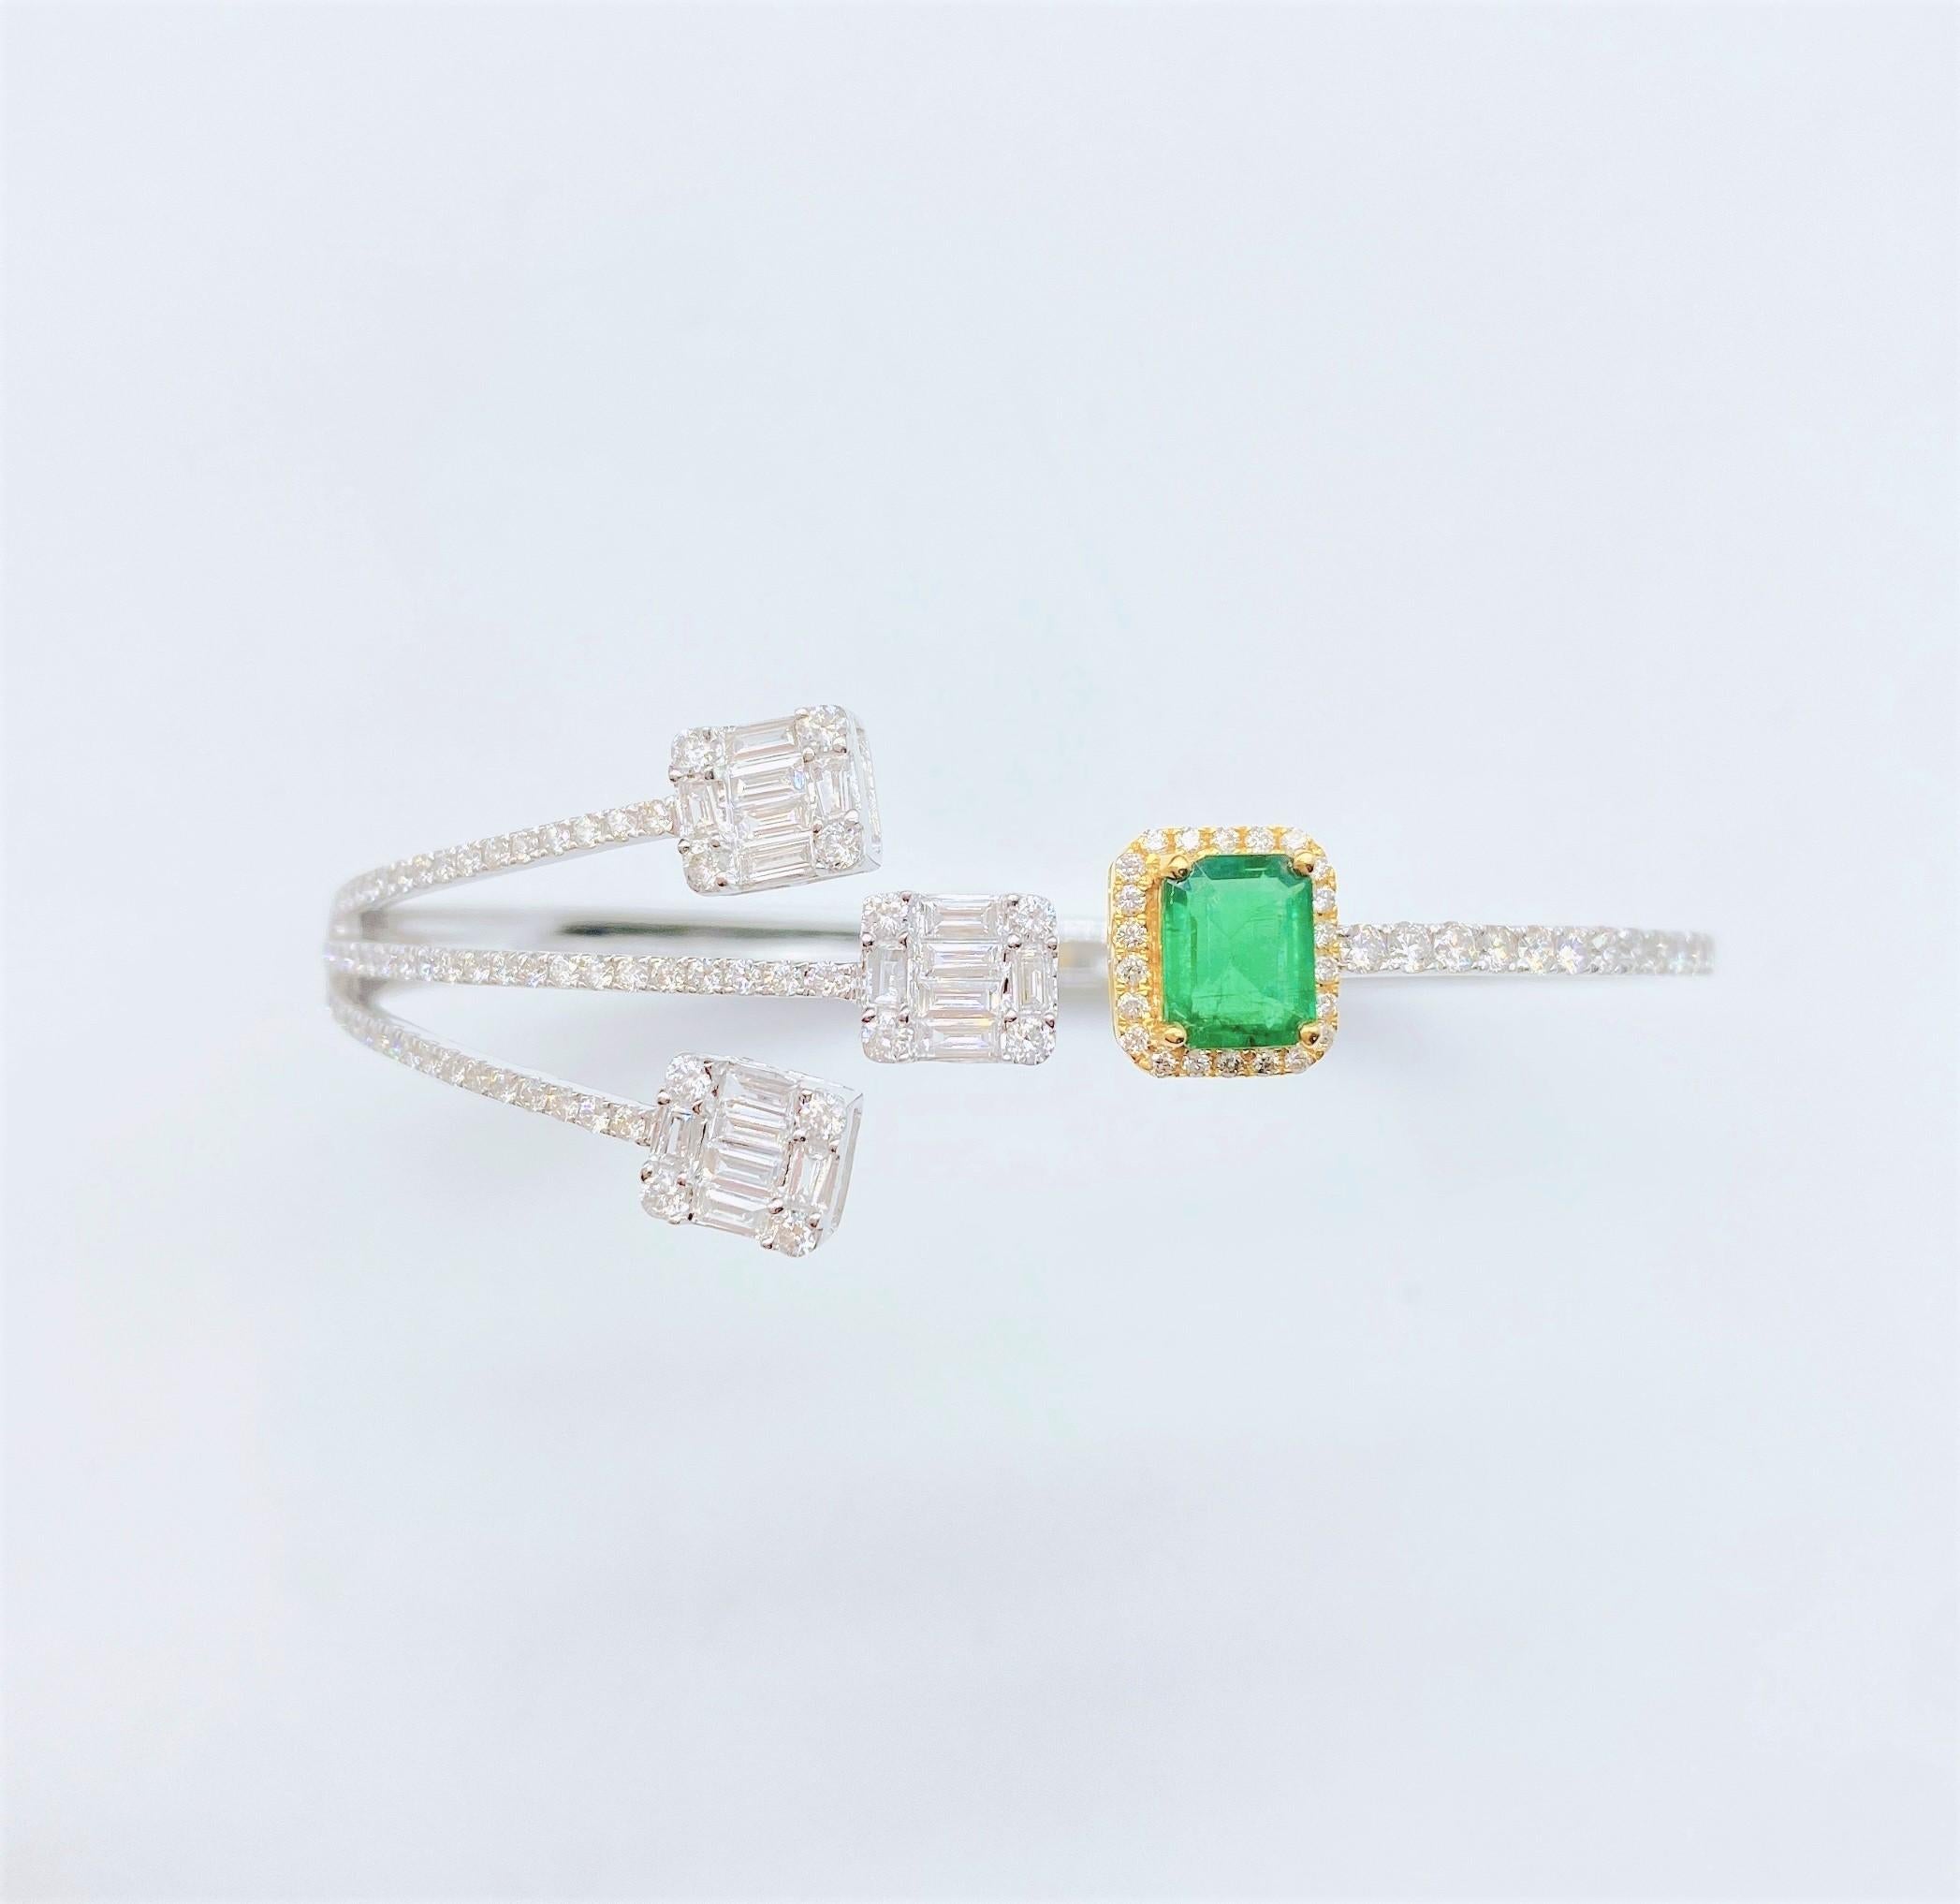 The Following Items we are offering is this Rare Important Radiant 18KT Gold Gorgeous Glittering and Sparkling Magnificent Fancy Emerald and Diamond Bangle Cuff. Bangle features a Beautiful Fancy Cut Emeralds and Fancy Trillion Baguette and Round